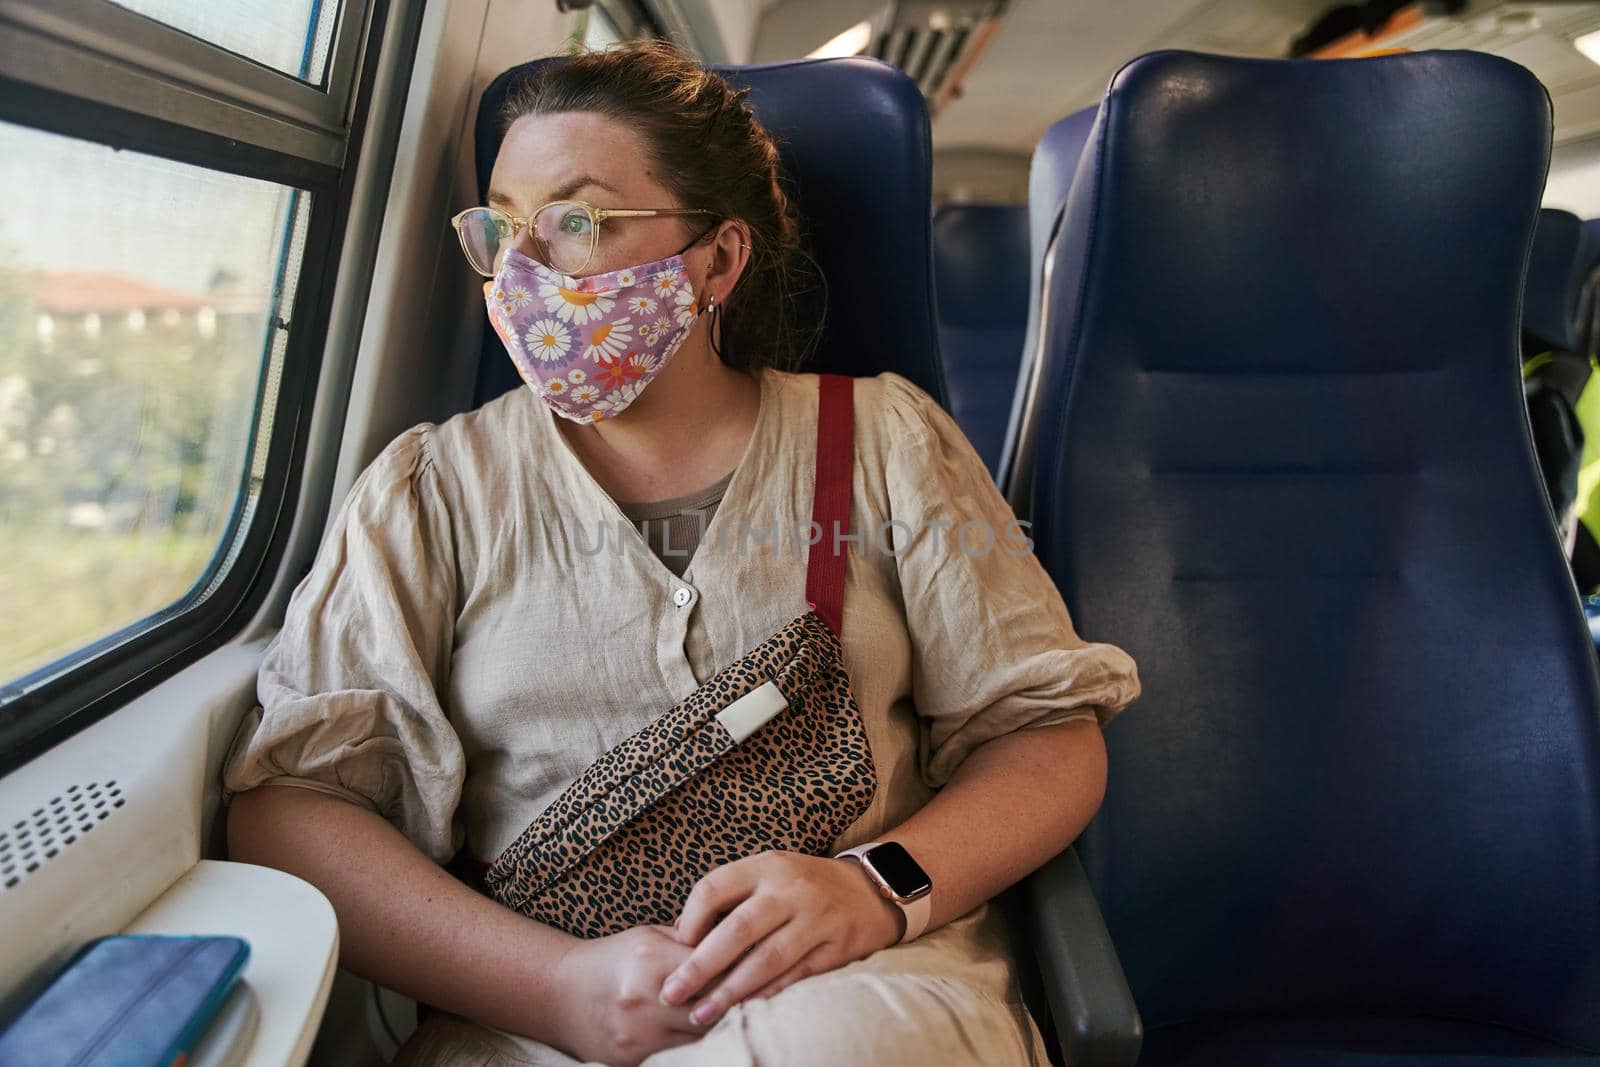 A girl in glasses and a medical mask riding a train and looking out the window by driver-s